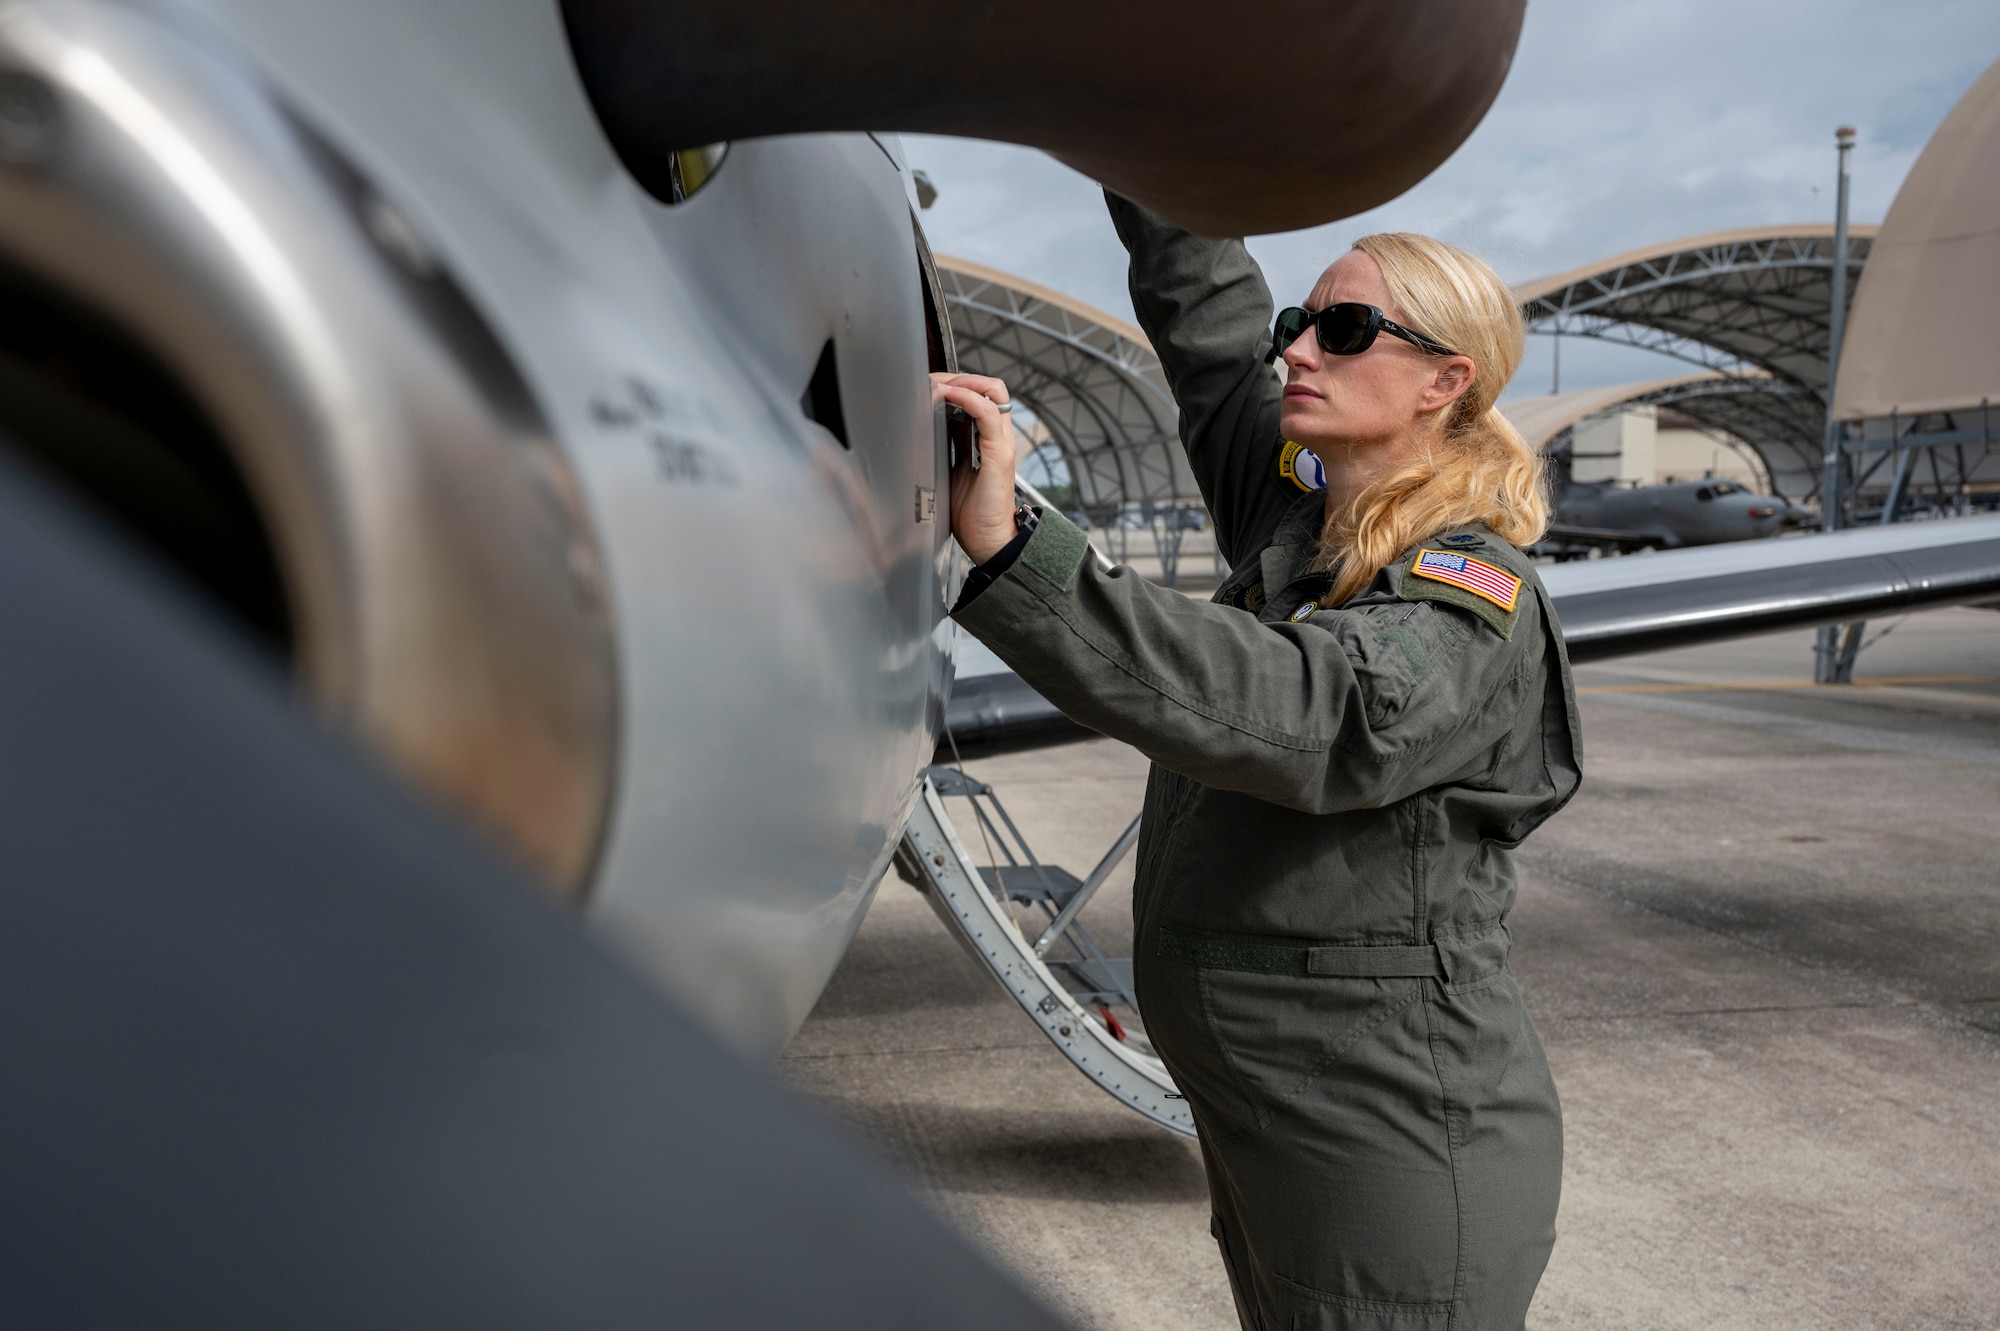 Lt. Col. Caitlin Reilly conducts pre-flight inspections Oct. 25, 2022, at Hurlburt Field, Fla. The Department of the Air Force recently introduced new procedures that empower female aircrew to make the most informed decisions about whether to fly while pregnant. (U.S. Air Force photo by Airman 1st Class Caleb Pavao)